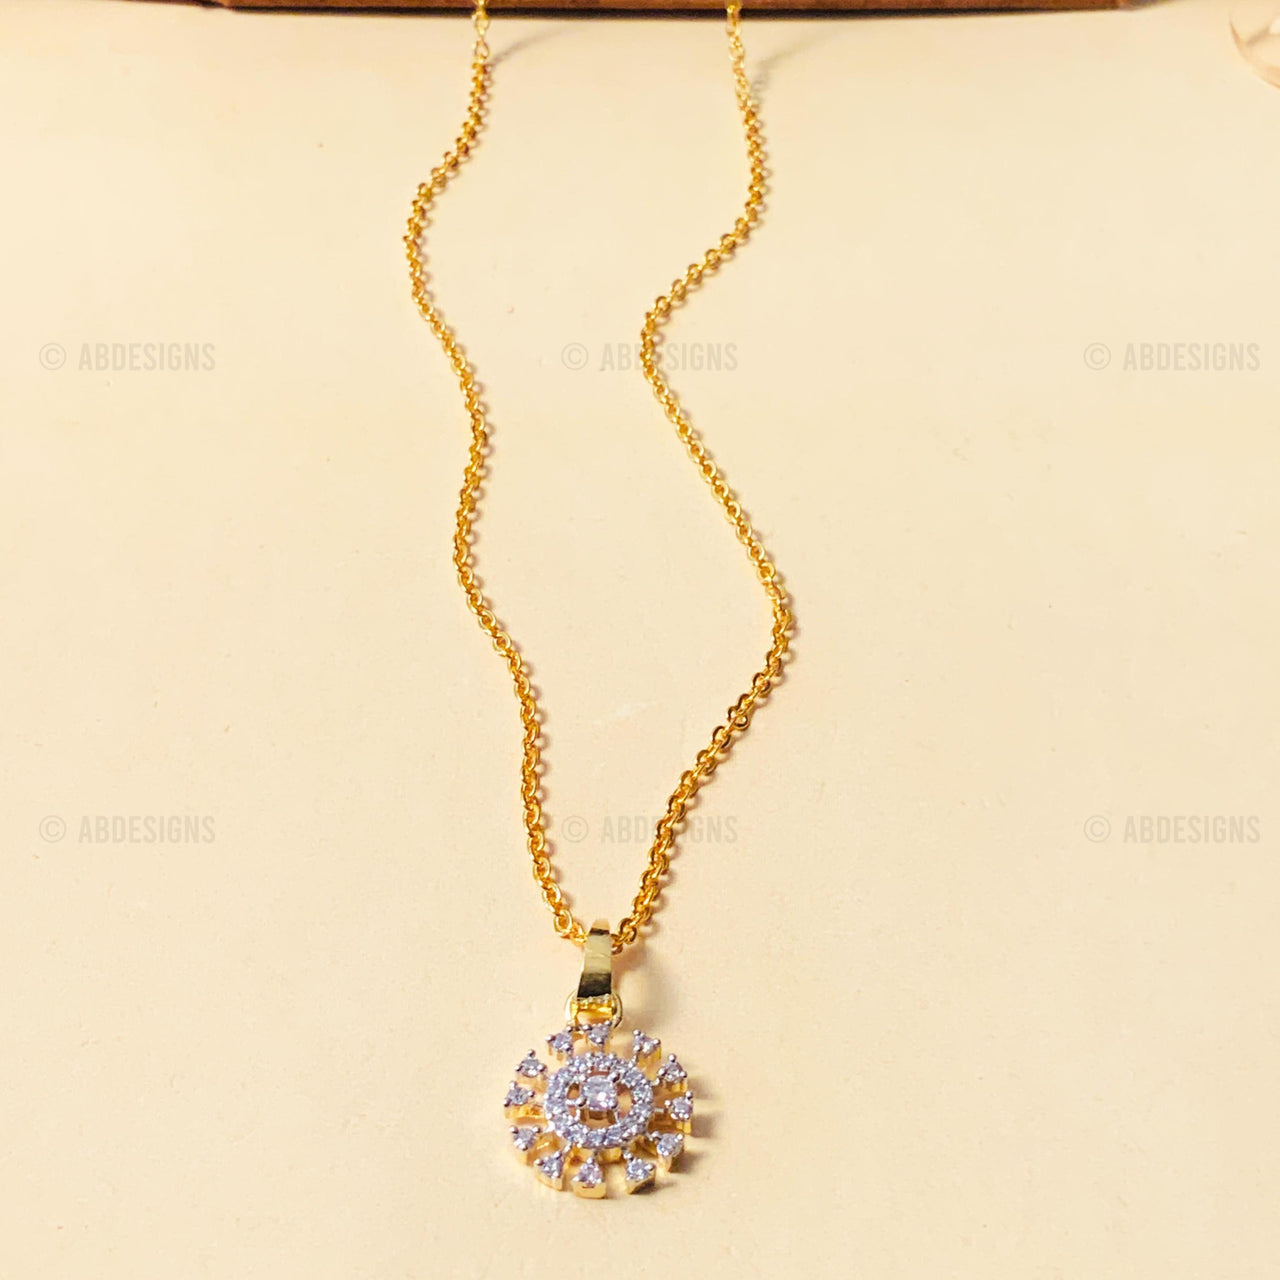 High-Quality Sophisticated Gold Plated Pendant Chain